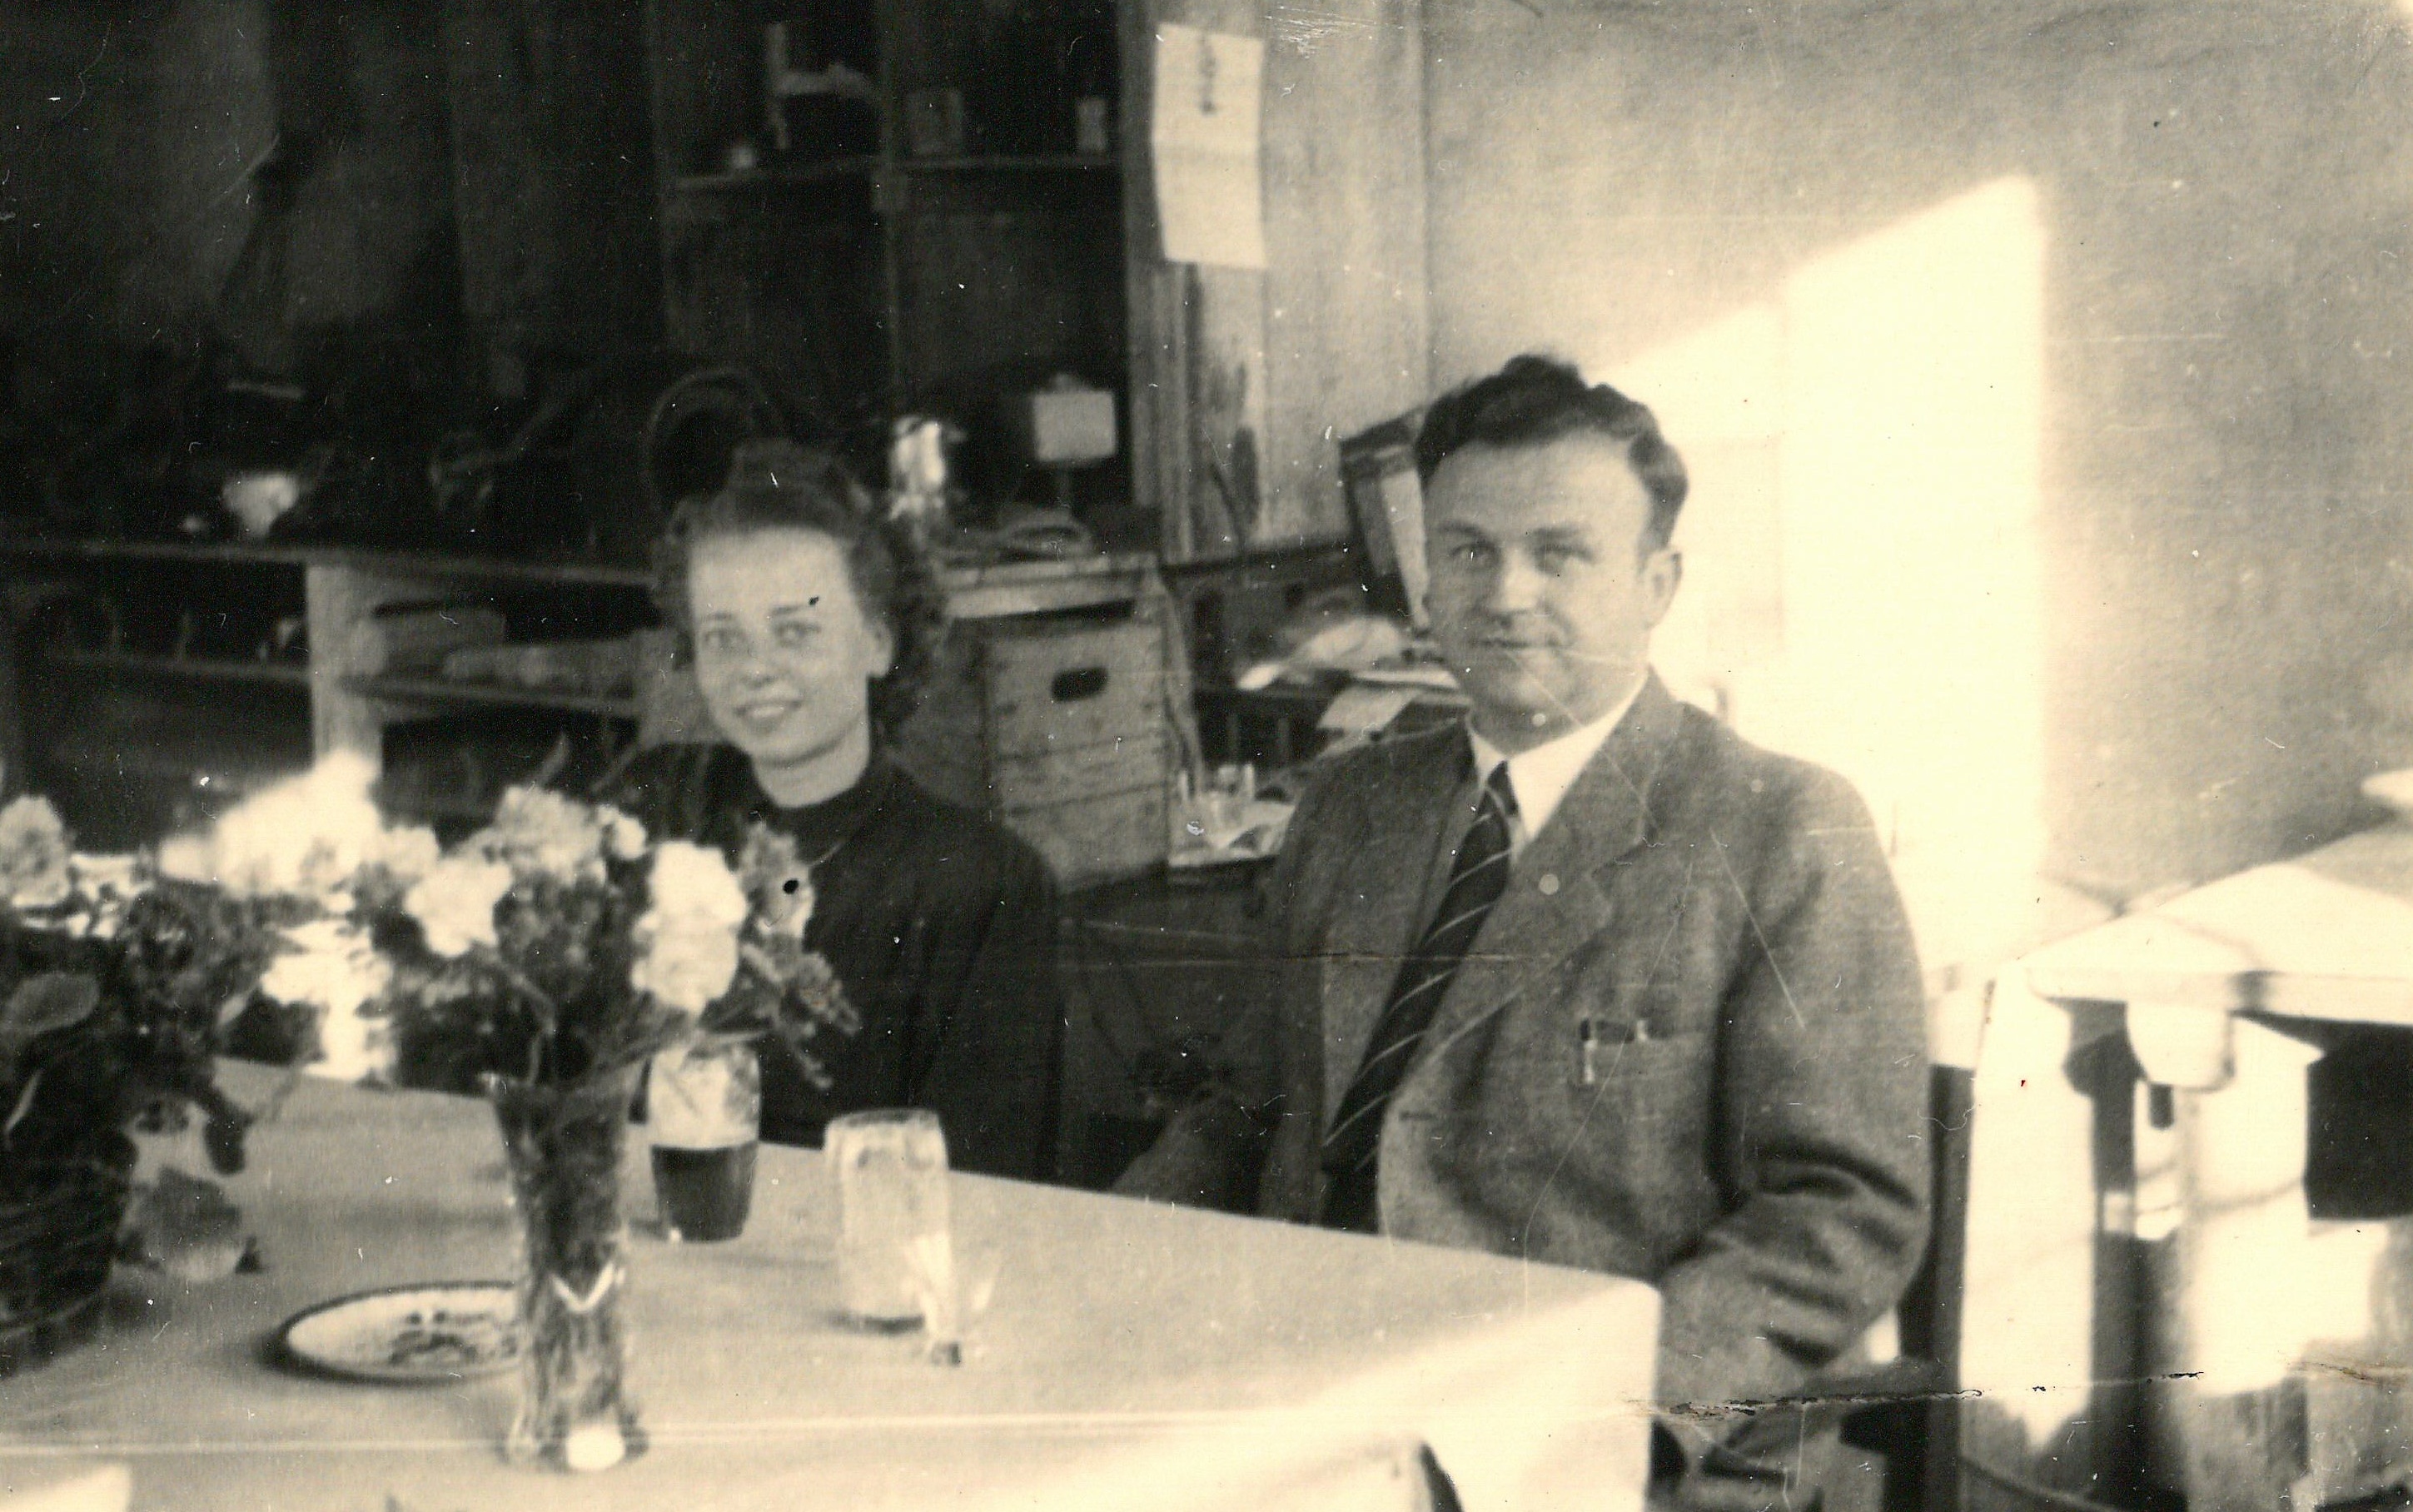 1948 - Get-together with Gisela and Kurt Menzel